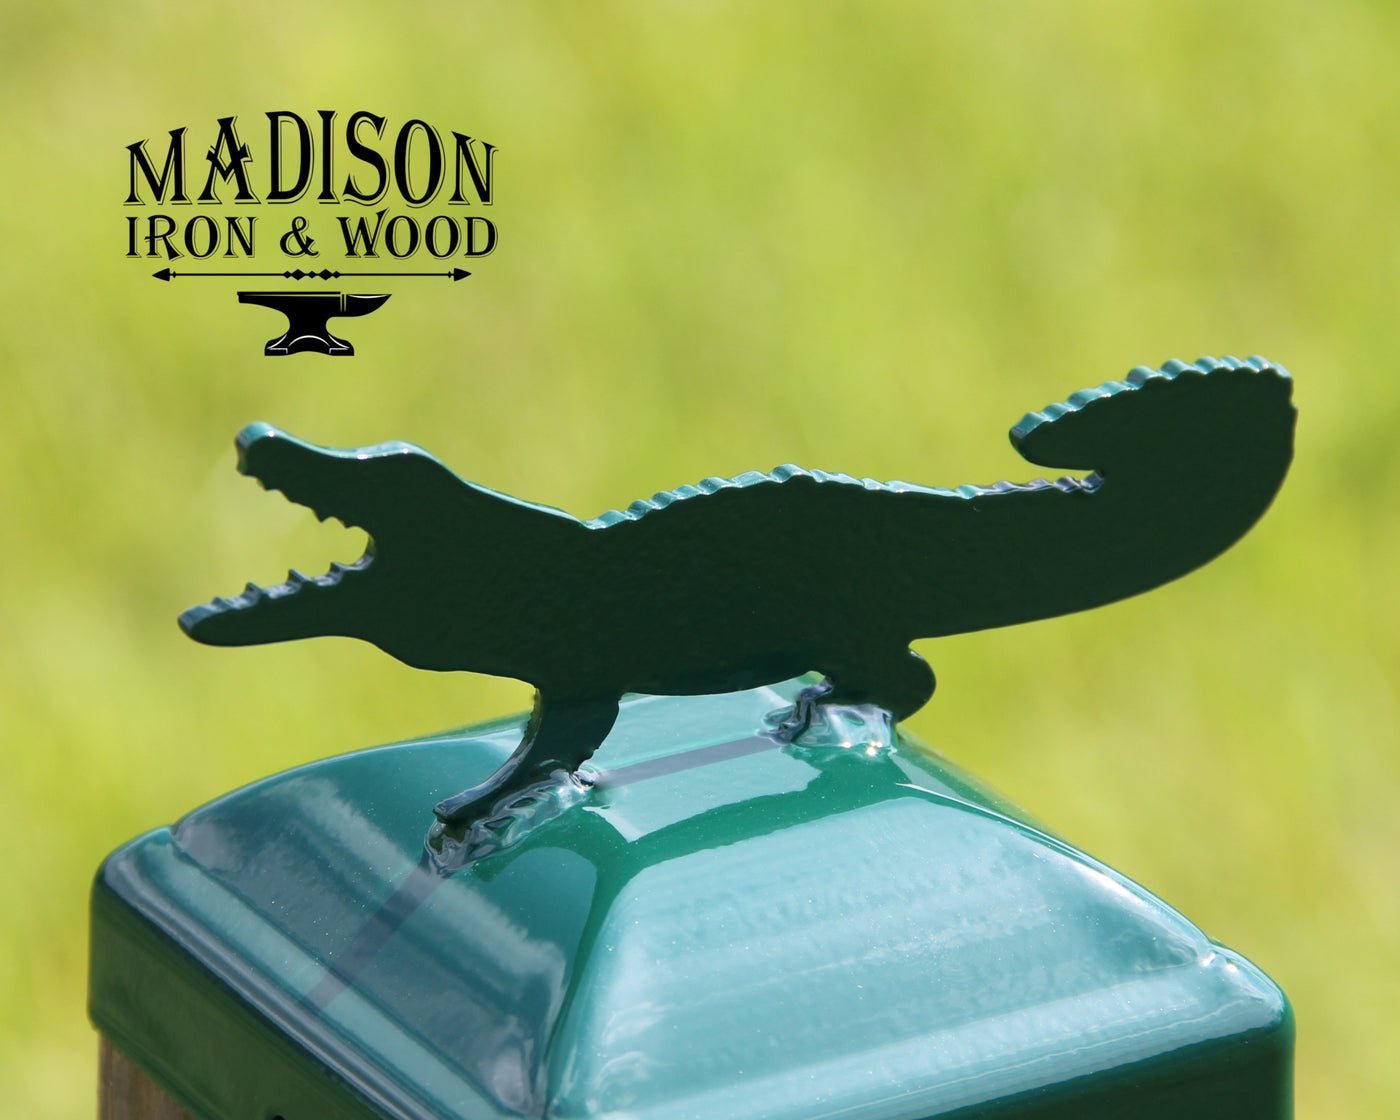 4x4 Alligator Post Cap - Madison Iron and Wood - Post Cap - metal outdoor decor - Steel deocrations - american made products - veteran owned business products - fencing decorations - fencing supplies - custom wall decorations - personalized wall signs - steel - decorative post caps - steel post caps - metal post caps - brackets - structural brackets - home improvement - mothers day - mothers day gift - mothers day ideas - summer decor - spring decor- spring yard decor - summer yard decor